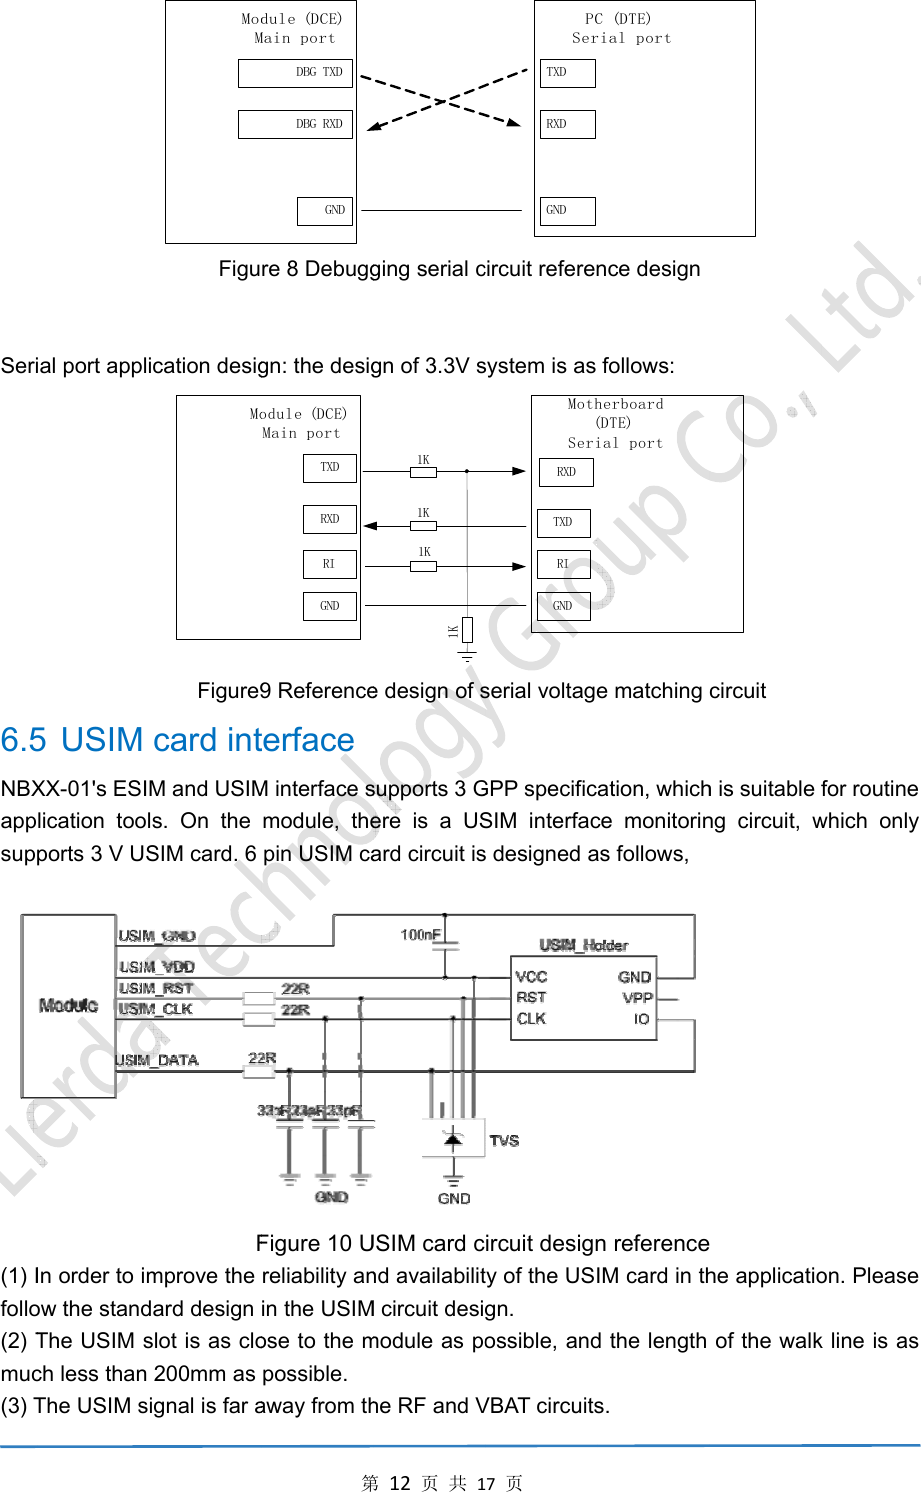  Seri6.5NBXappsup(1) Ifollo(2) Tmuc(3) Tial port appl5 USIM XX-01&apos;s ESIlication toolports 3 V USIn order to imow the standThe USIM sch less than The USIM sModMFiguication desigMoFigure9card intM and USIMls. On the SIM card. 6 Fmprove the dard design slot is as clo200mm as ignal is far a第DBG TXDDBG RXDGNDdule (DCE)Main portre 8 Debugggn: the desigTXDRXDRIGNDodule (DCE)Main port9 ReferenceterfaceM interface smodule, thepin USIM caFigure 10 Ureliability anin the USIMose to the mpossible. away from th第12页共1ging serial c gn of 3.3V s1K1K1K1Ke design of ssupports 3 Gere is a USard circuit isUSIM card cnd availabilitM circuit desimodule as pohe RF and V17页TXDRXDGNDPCSercircuit referensystem is as TXDRXDRIGNDMoth(Seriserial voltageGPP specificSIM interfacs designed aircuit designty of the USgn. ossible, andVBAT circuitsC (DTE)rial portnce design follows: herboard(DTE)ial porte matching ation, whichce monitorinas follows,  n referenceIM card in thd the length s.   circuit h is suitable ng circuit, we he applicatioof the walkfor routine which only on. Please k line is as 